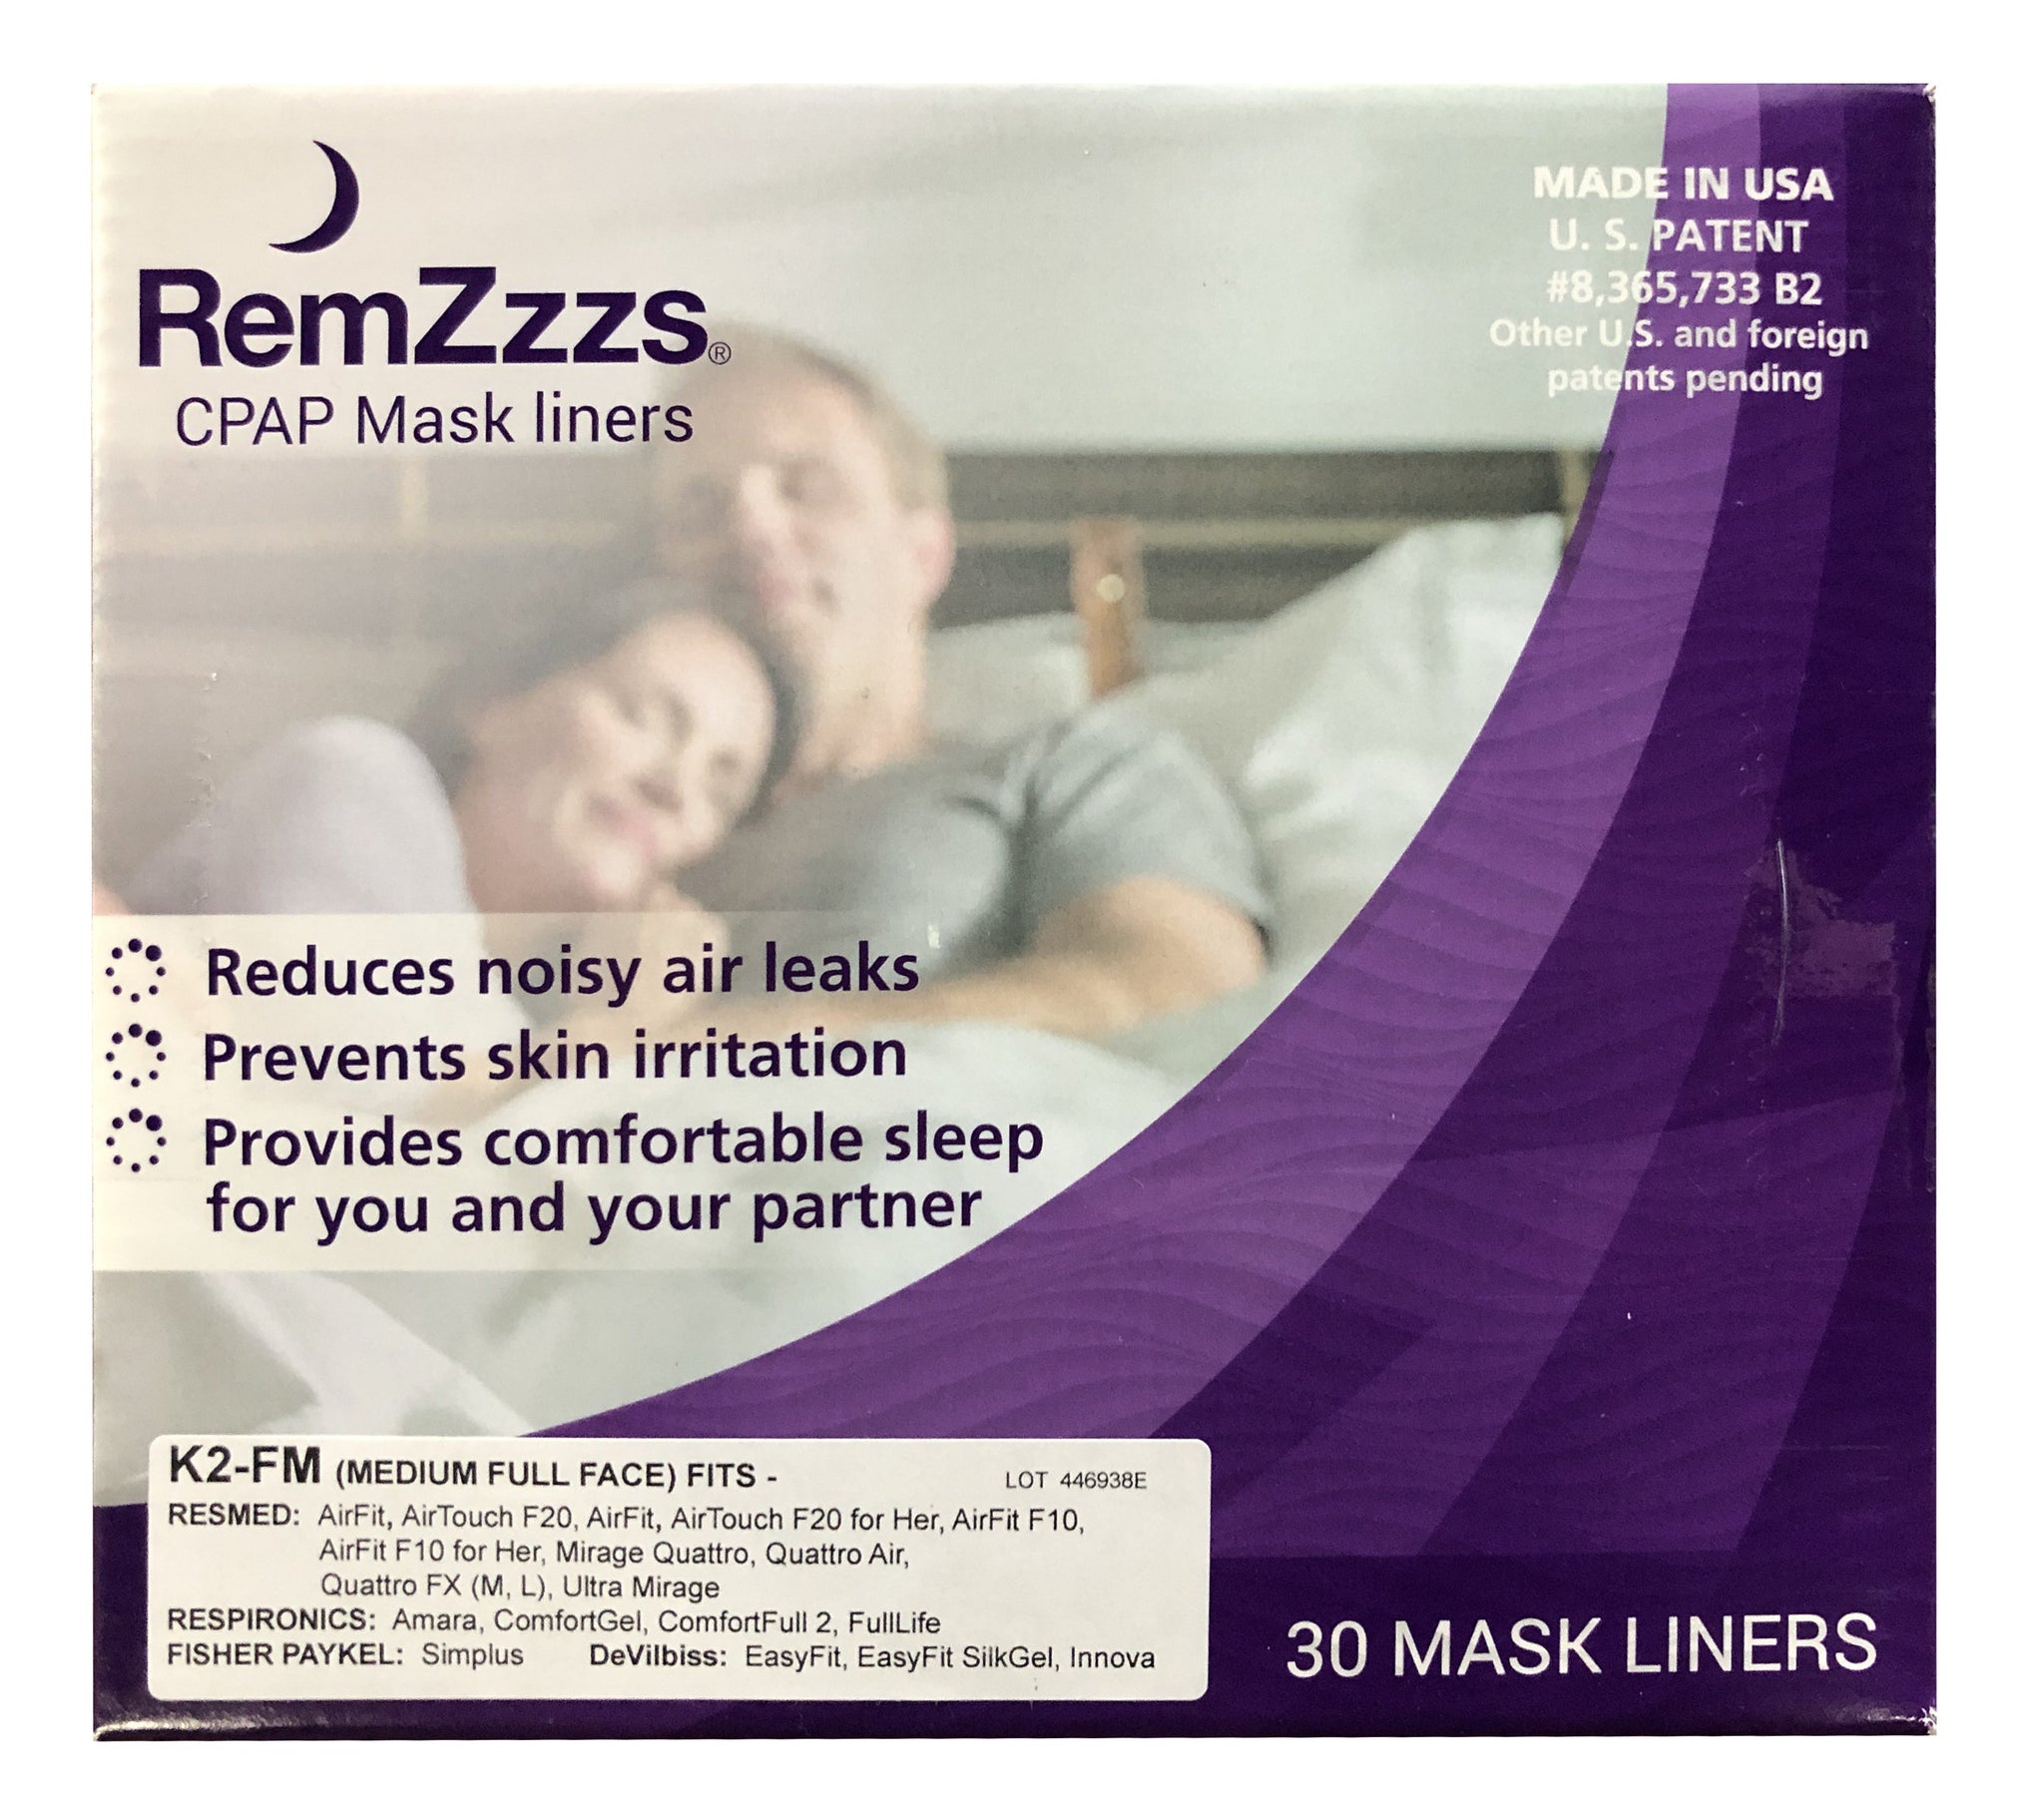 Remzzzs Padded Full Face Cpap Mask Liners For Medium Full Face Masks Mymedicaloutlet 2114